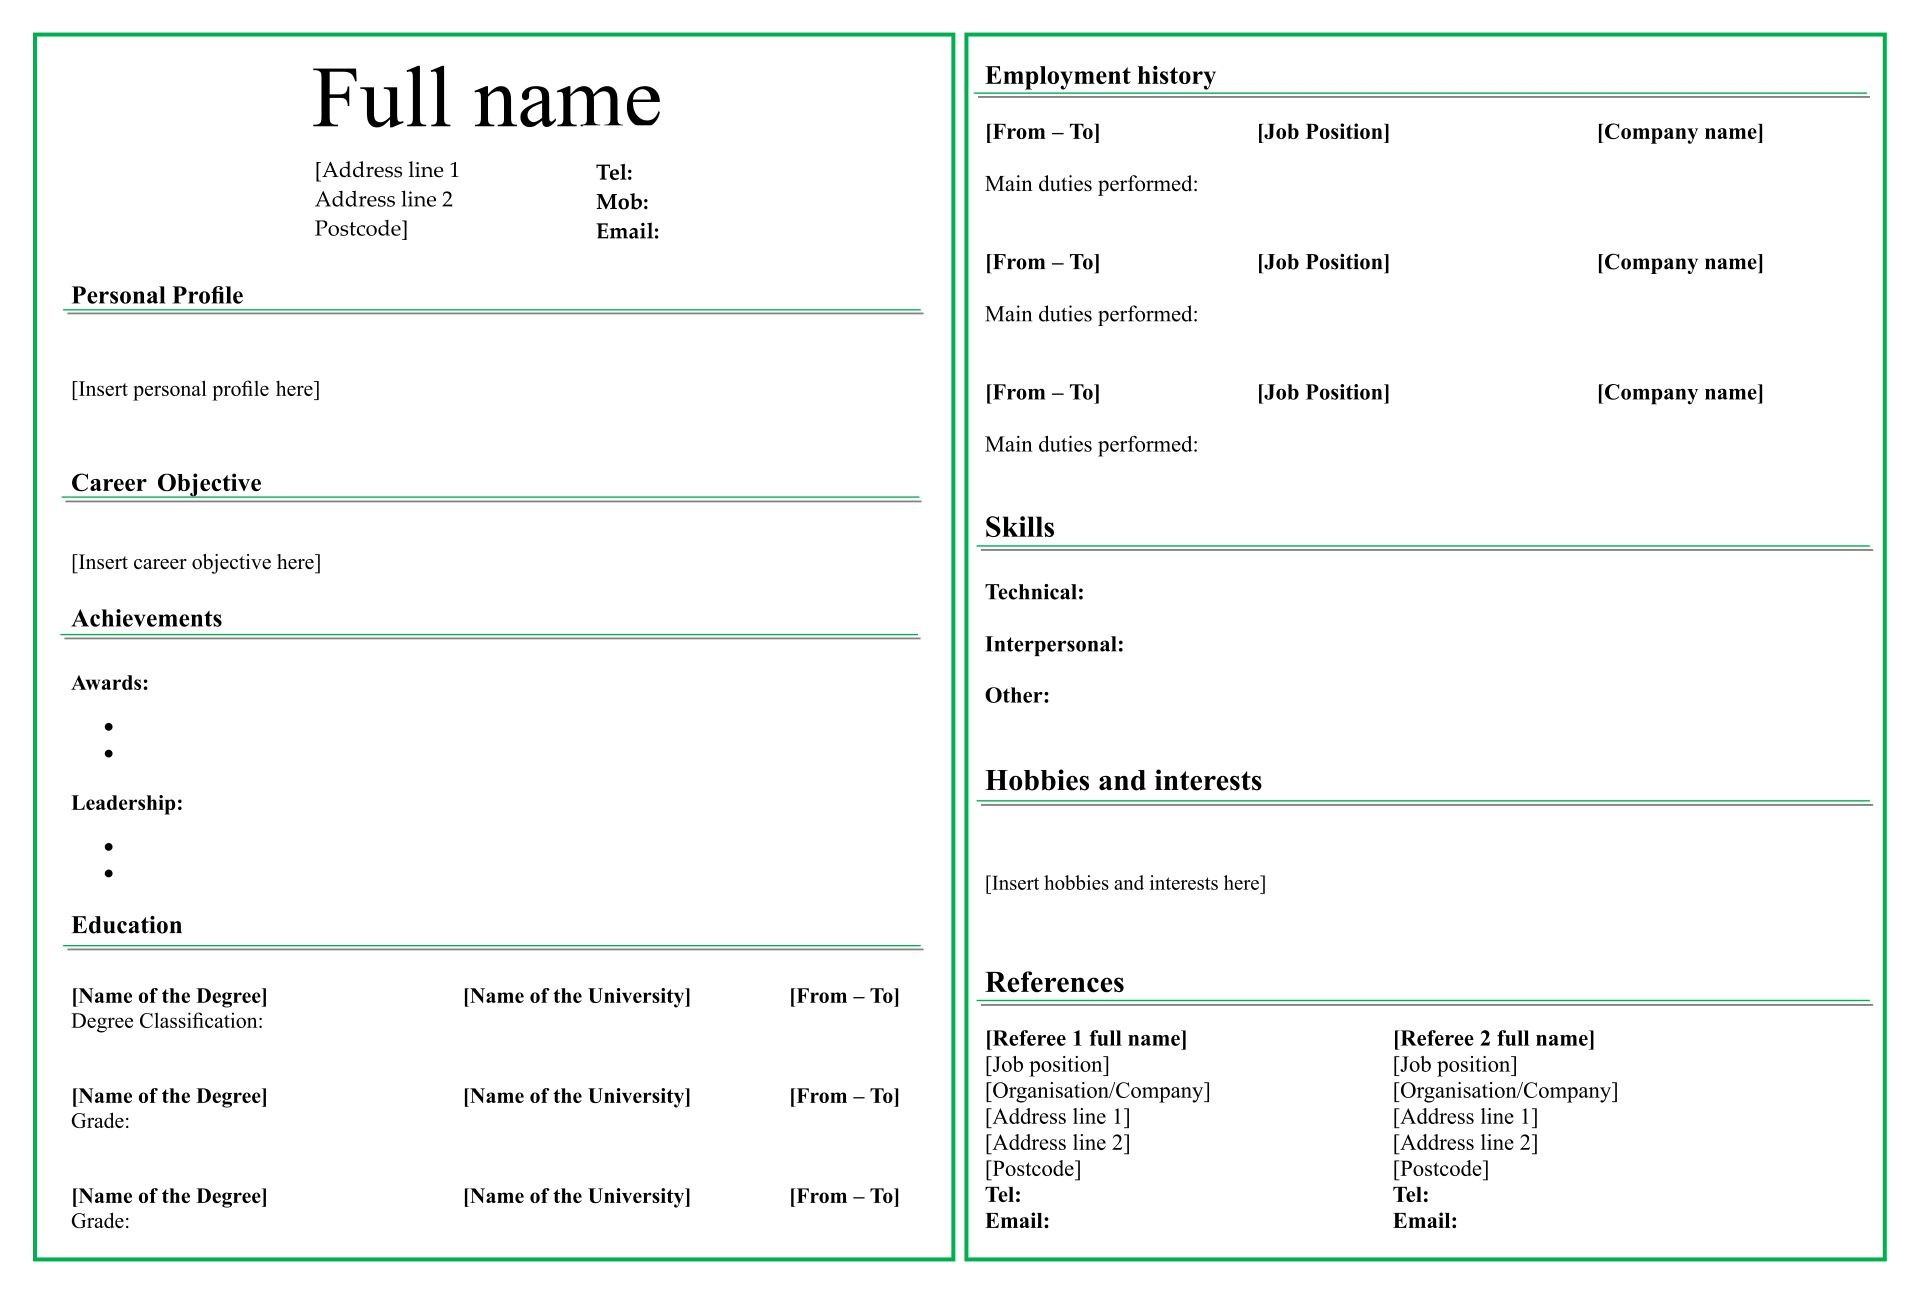 Resume Templates Fill In the Blanks Free 10 Best Fill In Blank Printable Resume – Printablee.com